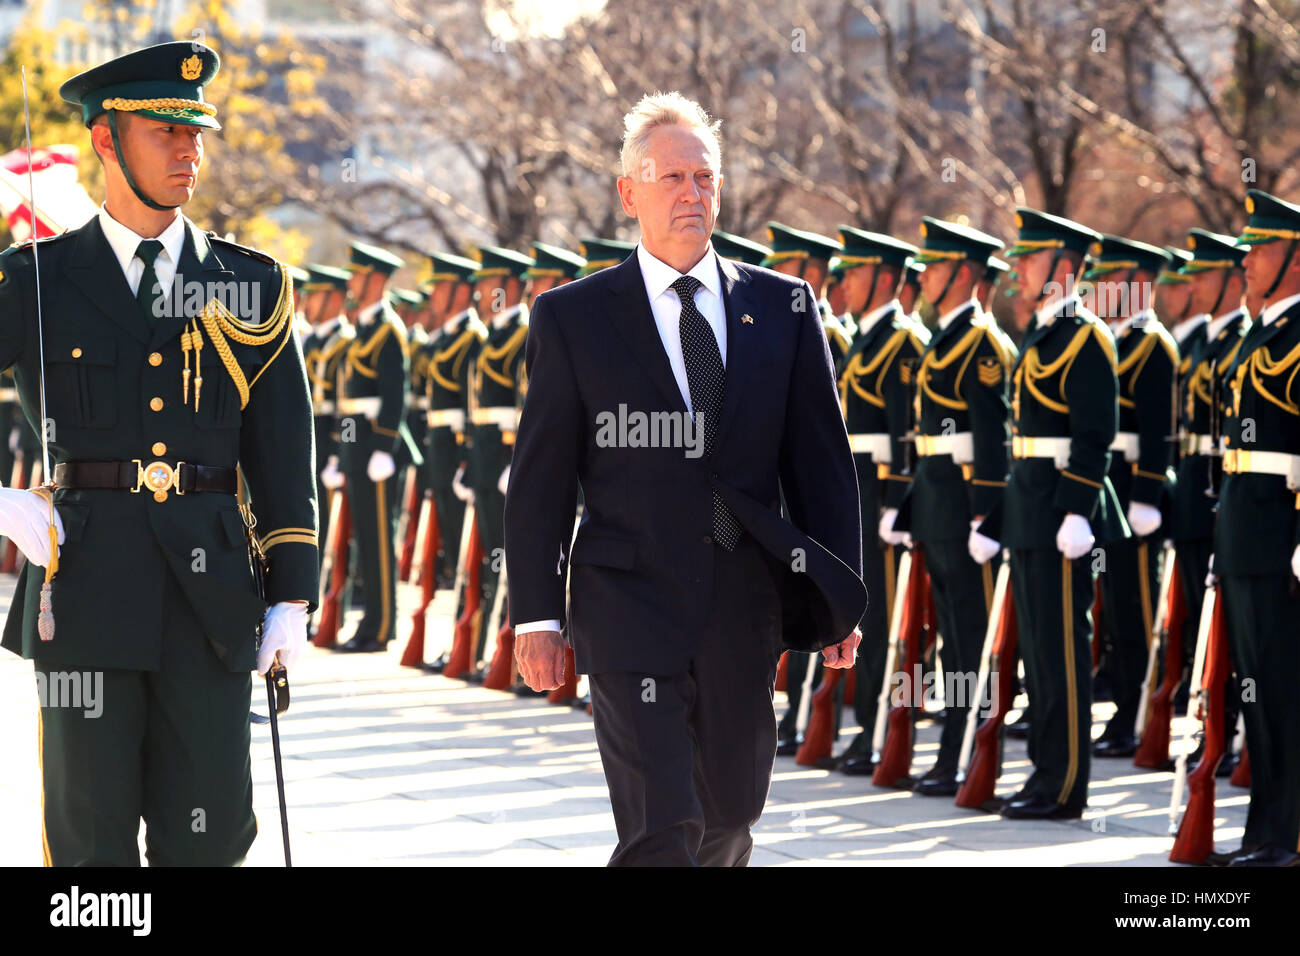 Tokyo, Japan. 4th Feb, 2017. Newly apponited U.S. Secretary of Defense James Mattis reviews the honor guards at the Defense Ministry in Tokyo on Saturday, February 4, 2017. Mattis is now here on his east Asian trip to exchange views with Japanese officials. Credit: Yoshio Tsunoda/AFLO/Alamy Live News Stock Photo